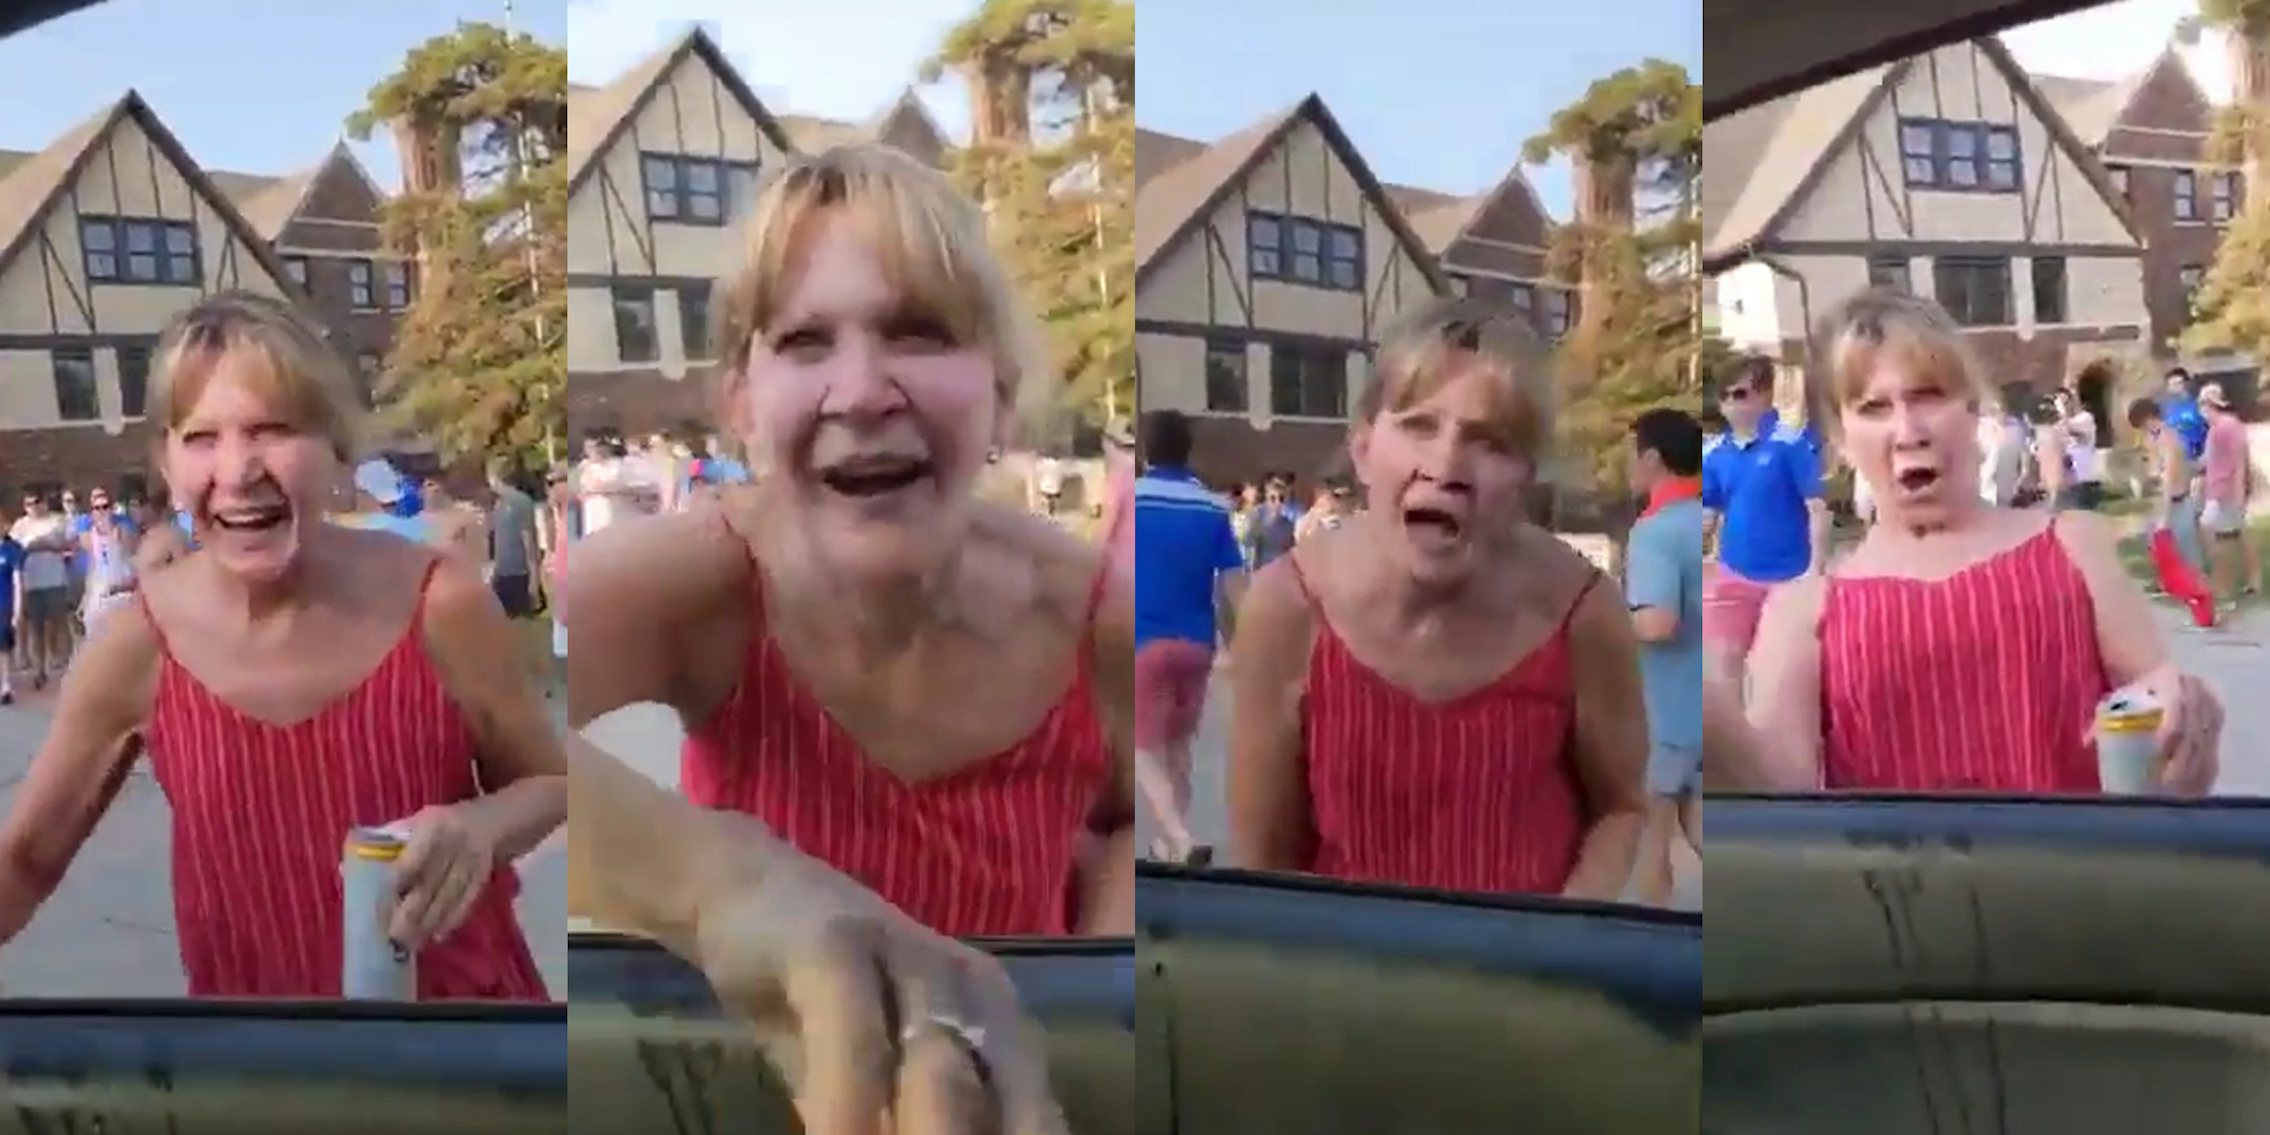 elderly woman at frat party drunkenly leans into a car